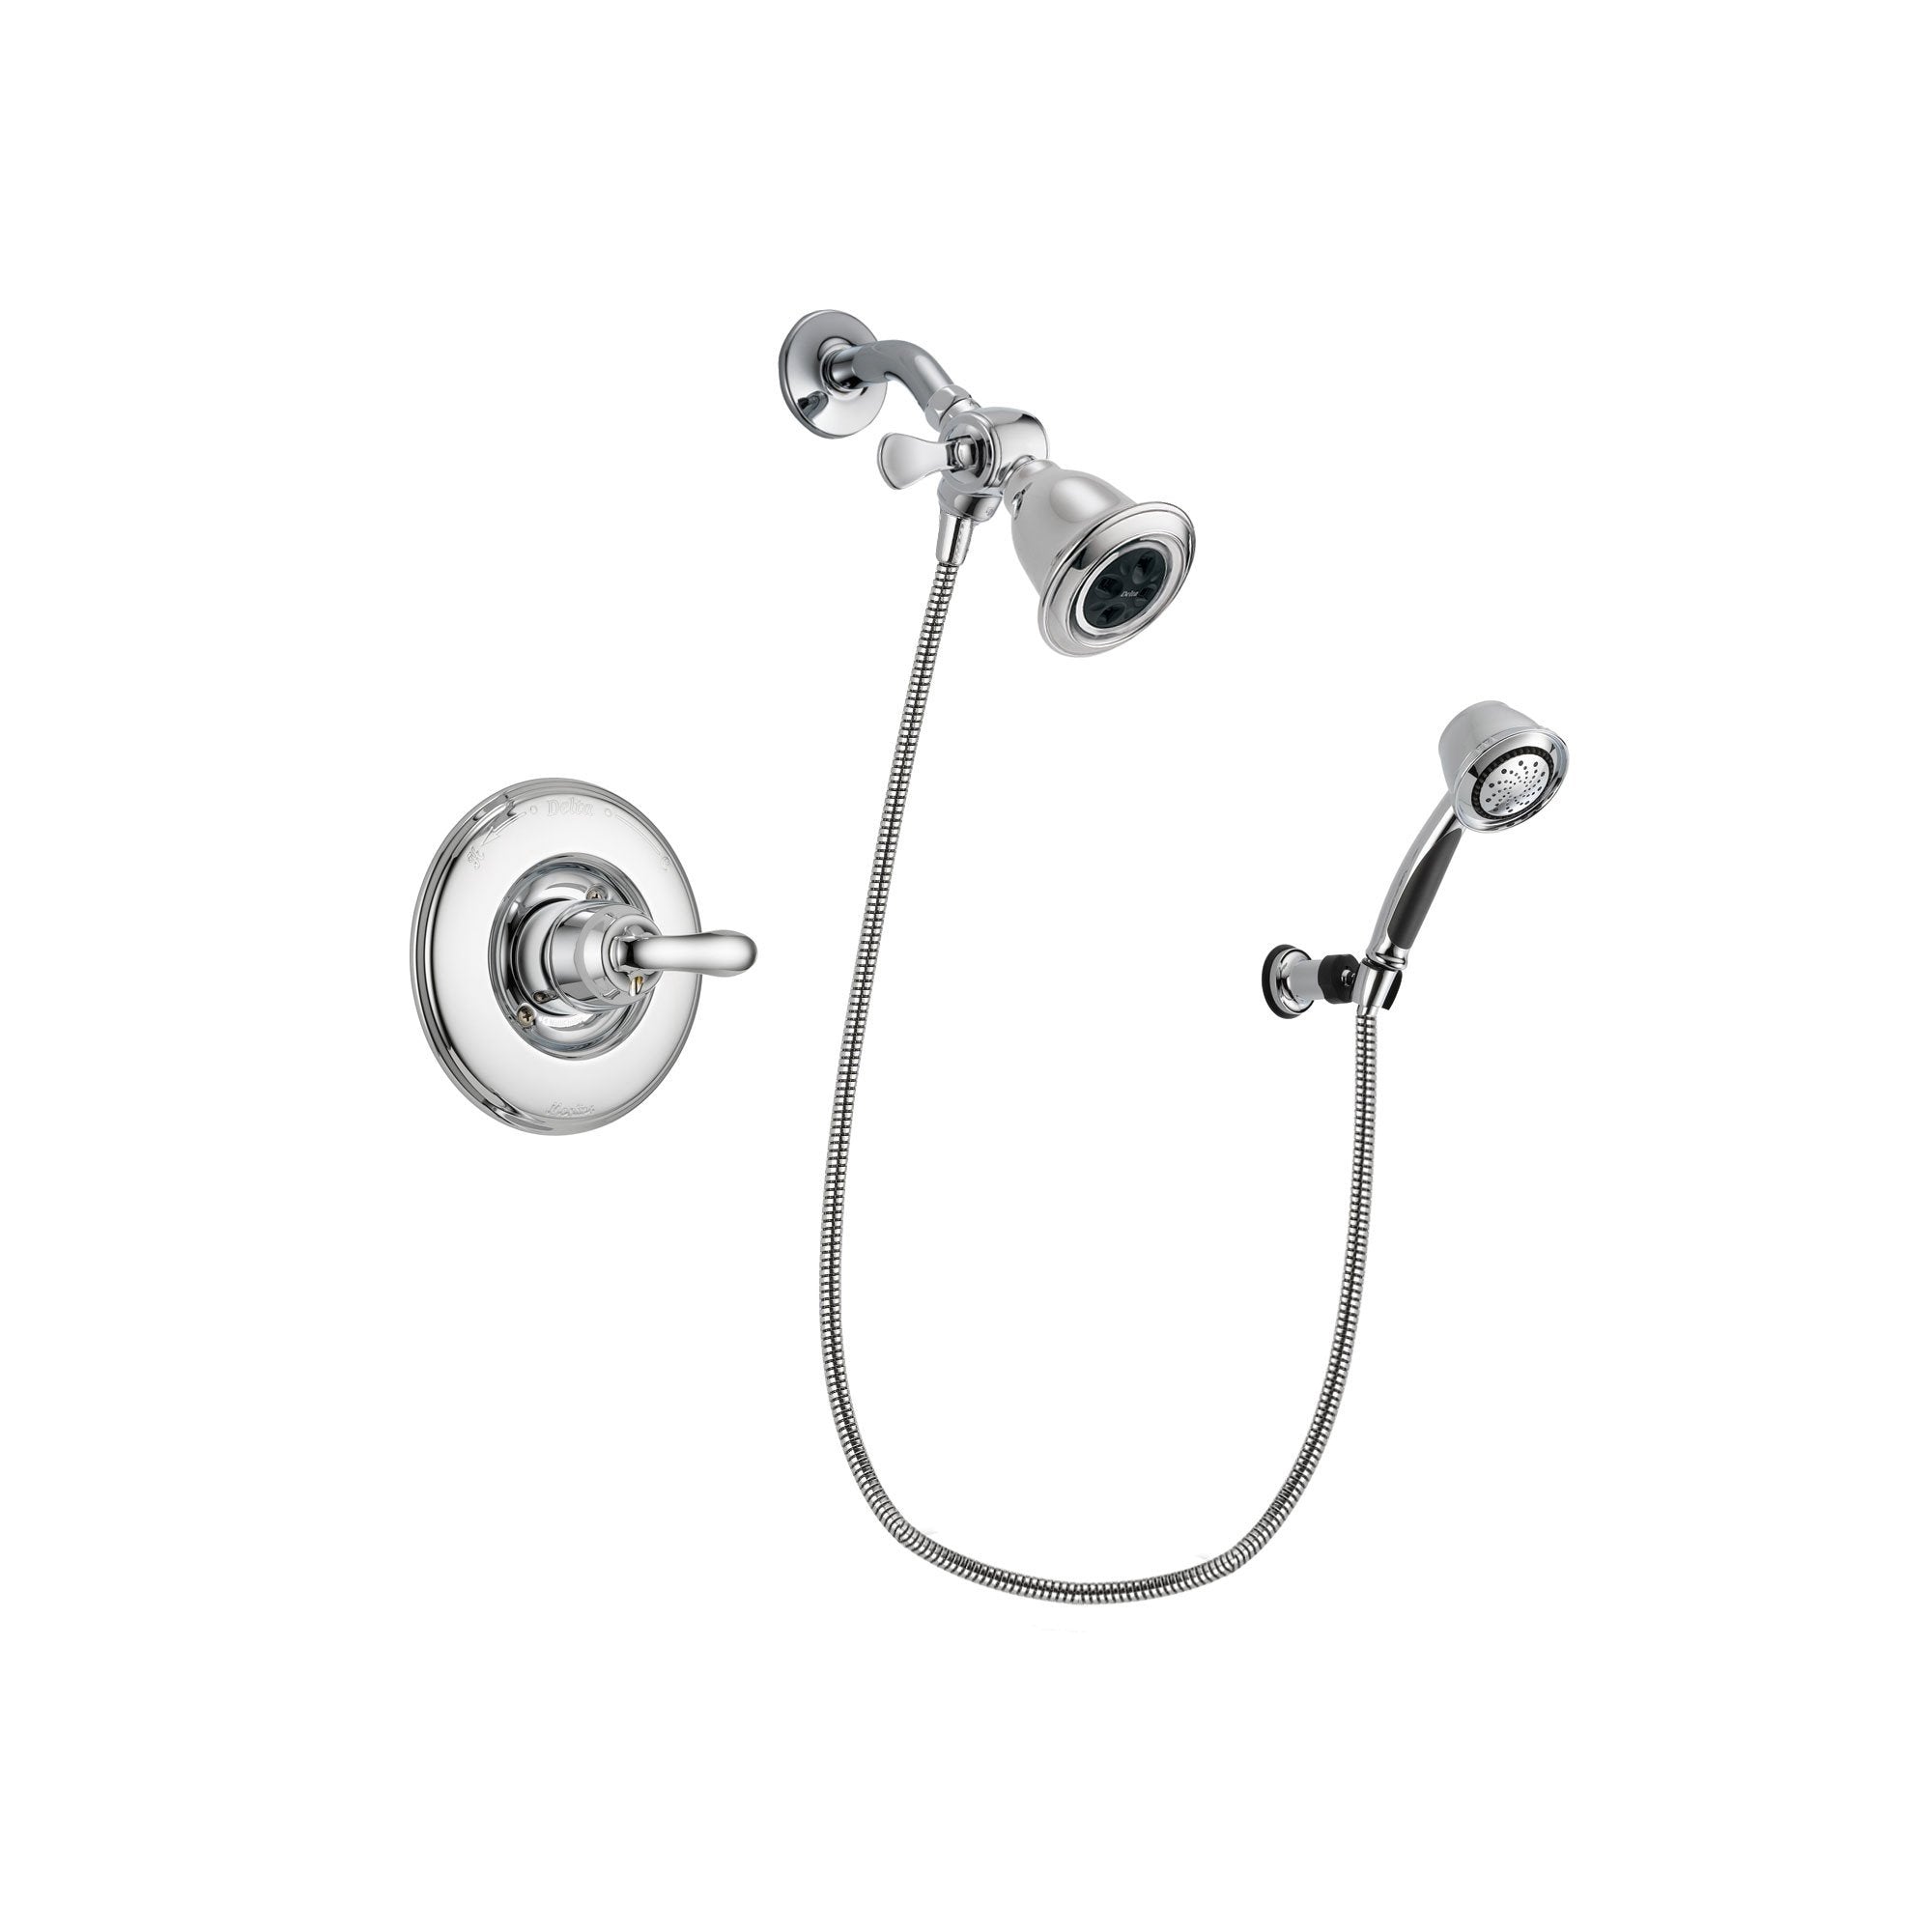 Delta Linden Chrome Finish Shower Faucet System Package with Water Efficient Showerhead and 5-Spray Adjustable Wall Mount Hand Shower Includes Rough-in Valve DSP0342V